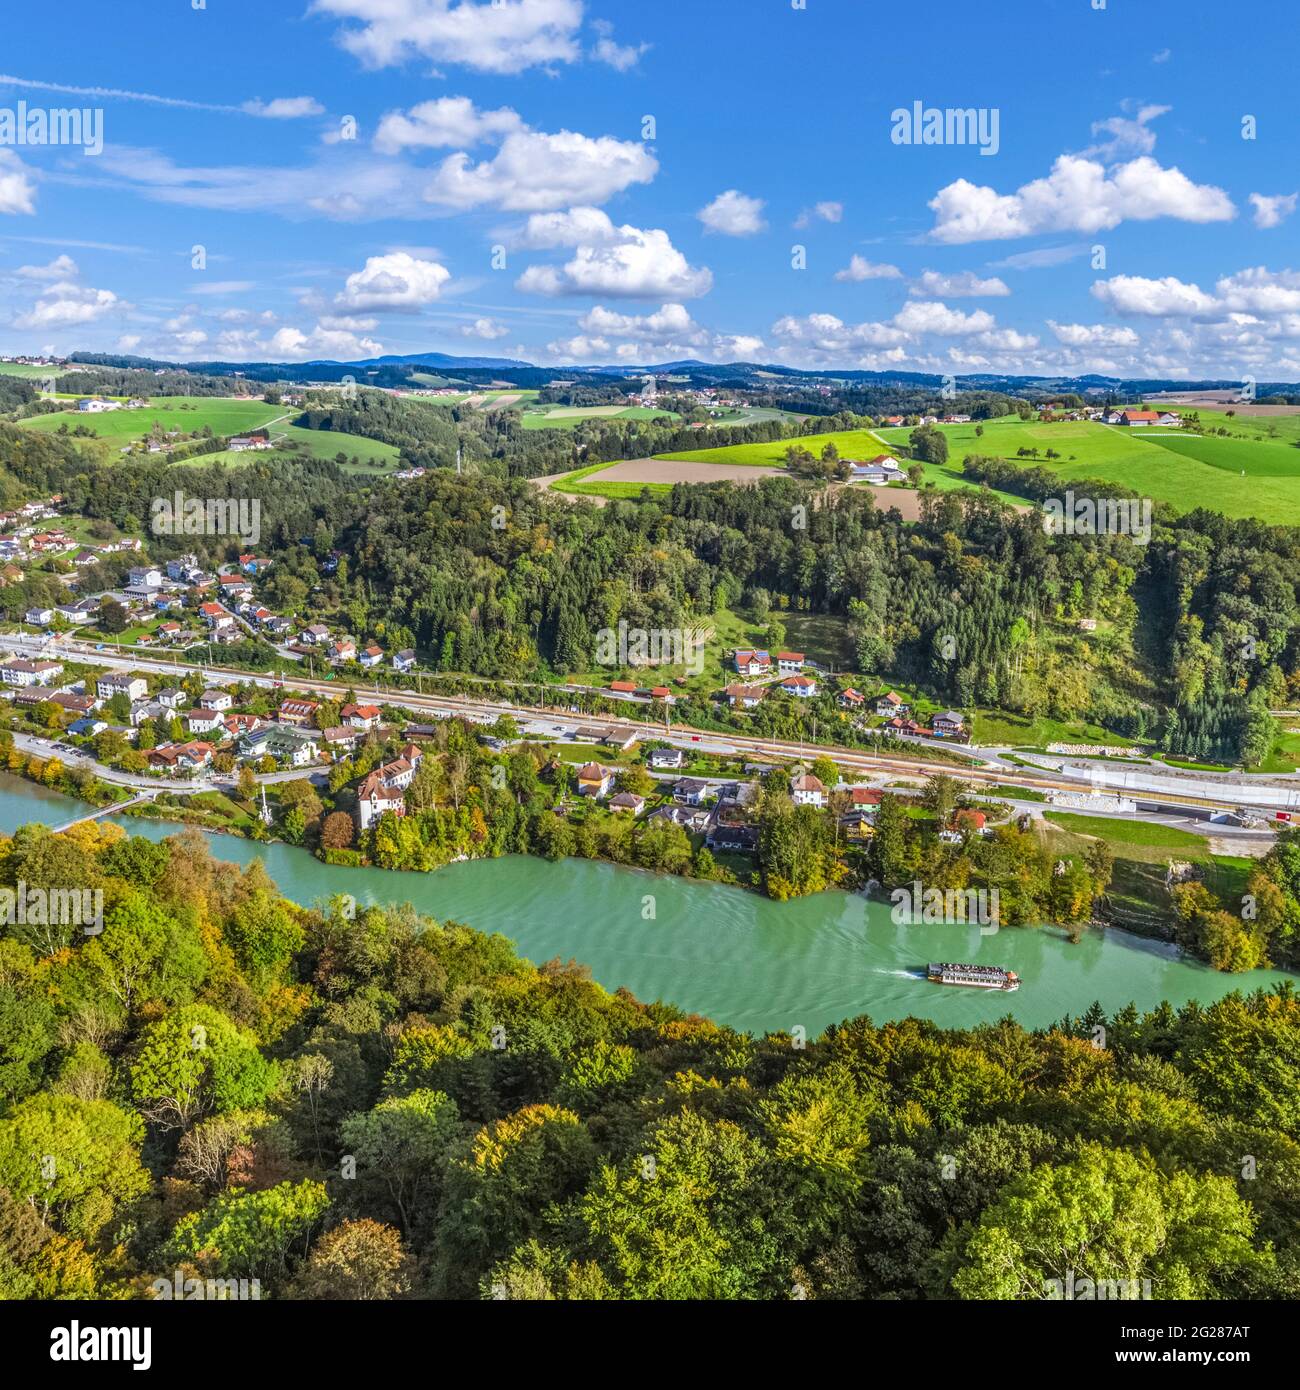 View of Wernstein Castle on the Inn River in Upper Austria, on the border with Lower Bavaria near Passau. Stock Photo